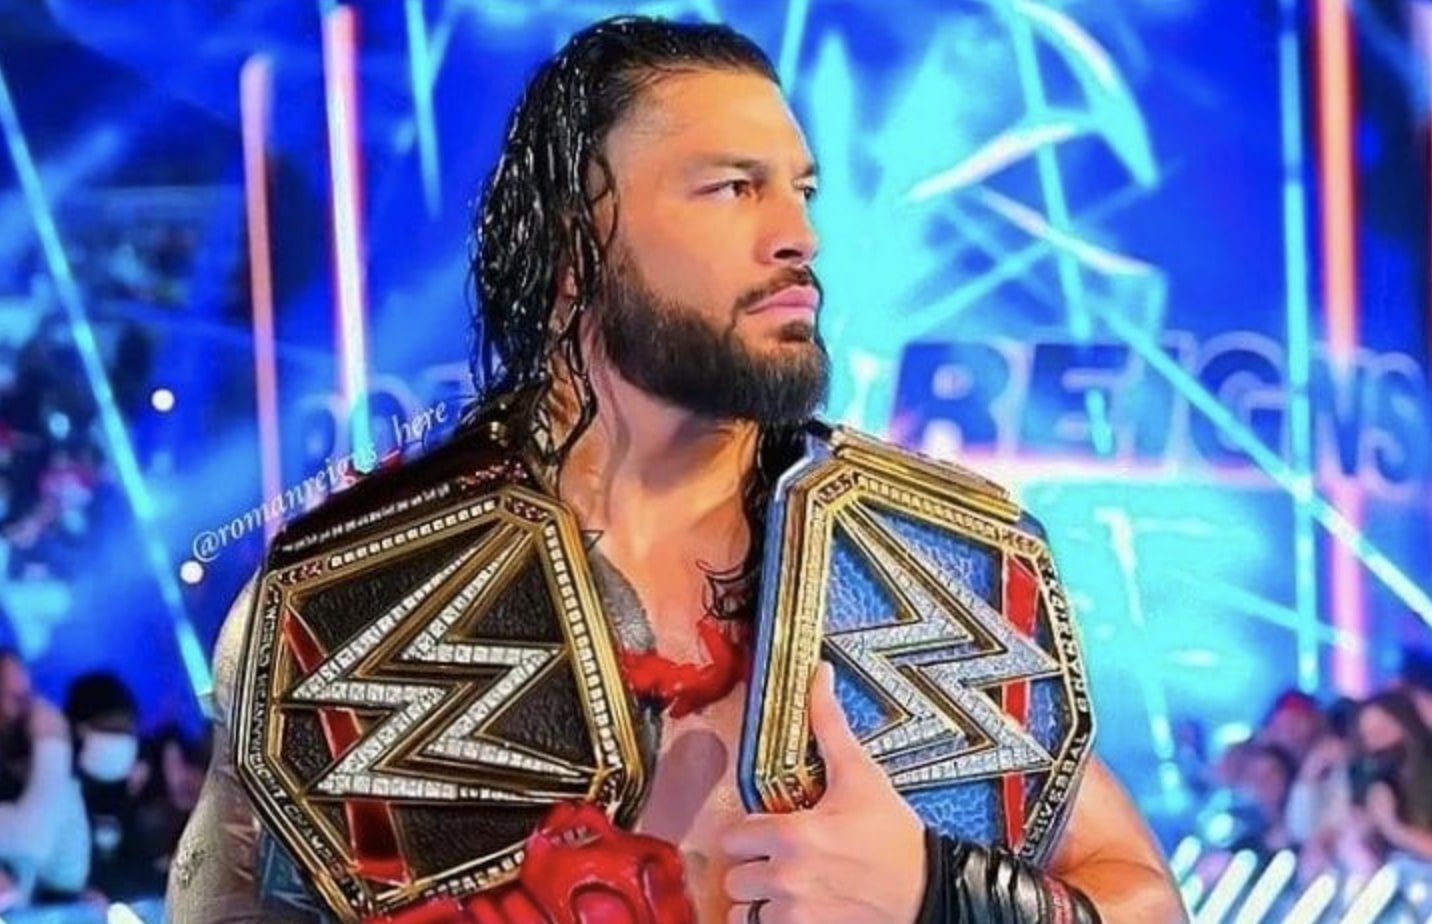 Possible Spoiler On Plans For Roman Reigns And The Undisputed WWE